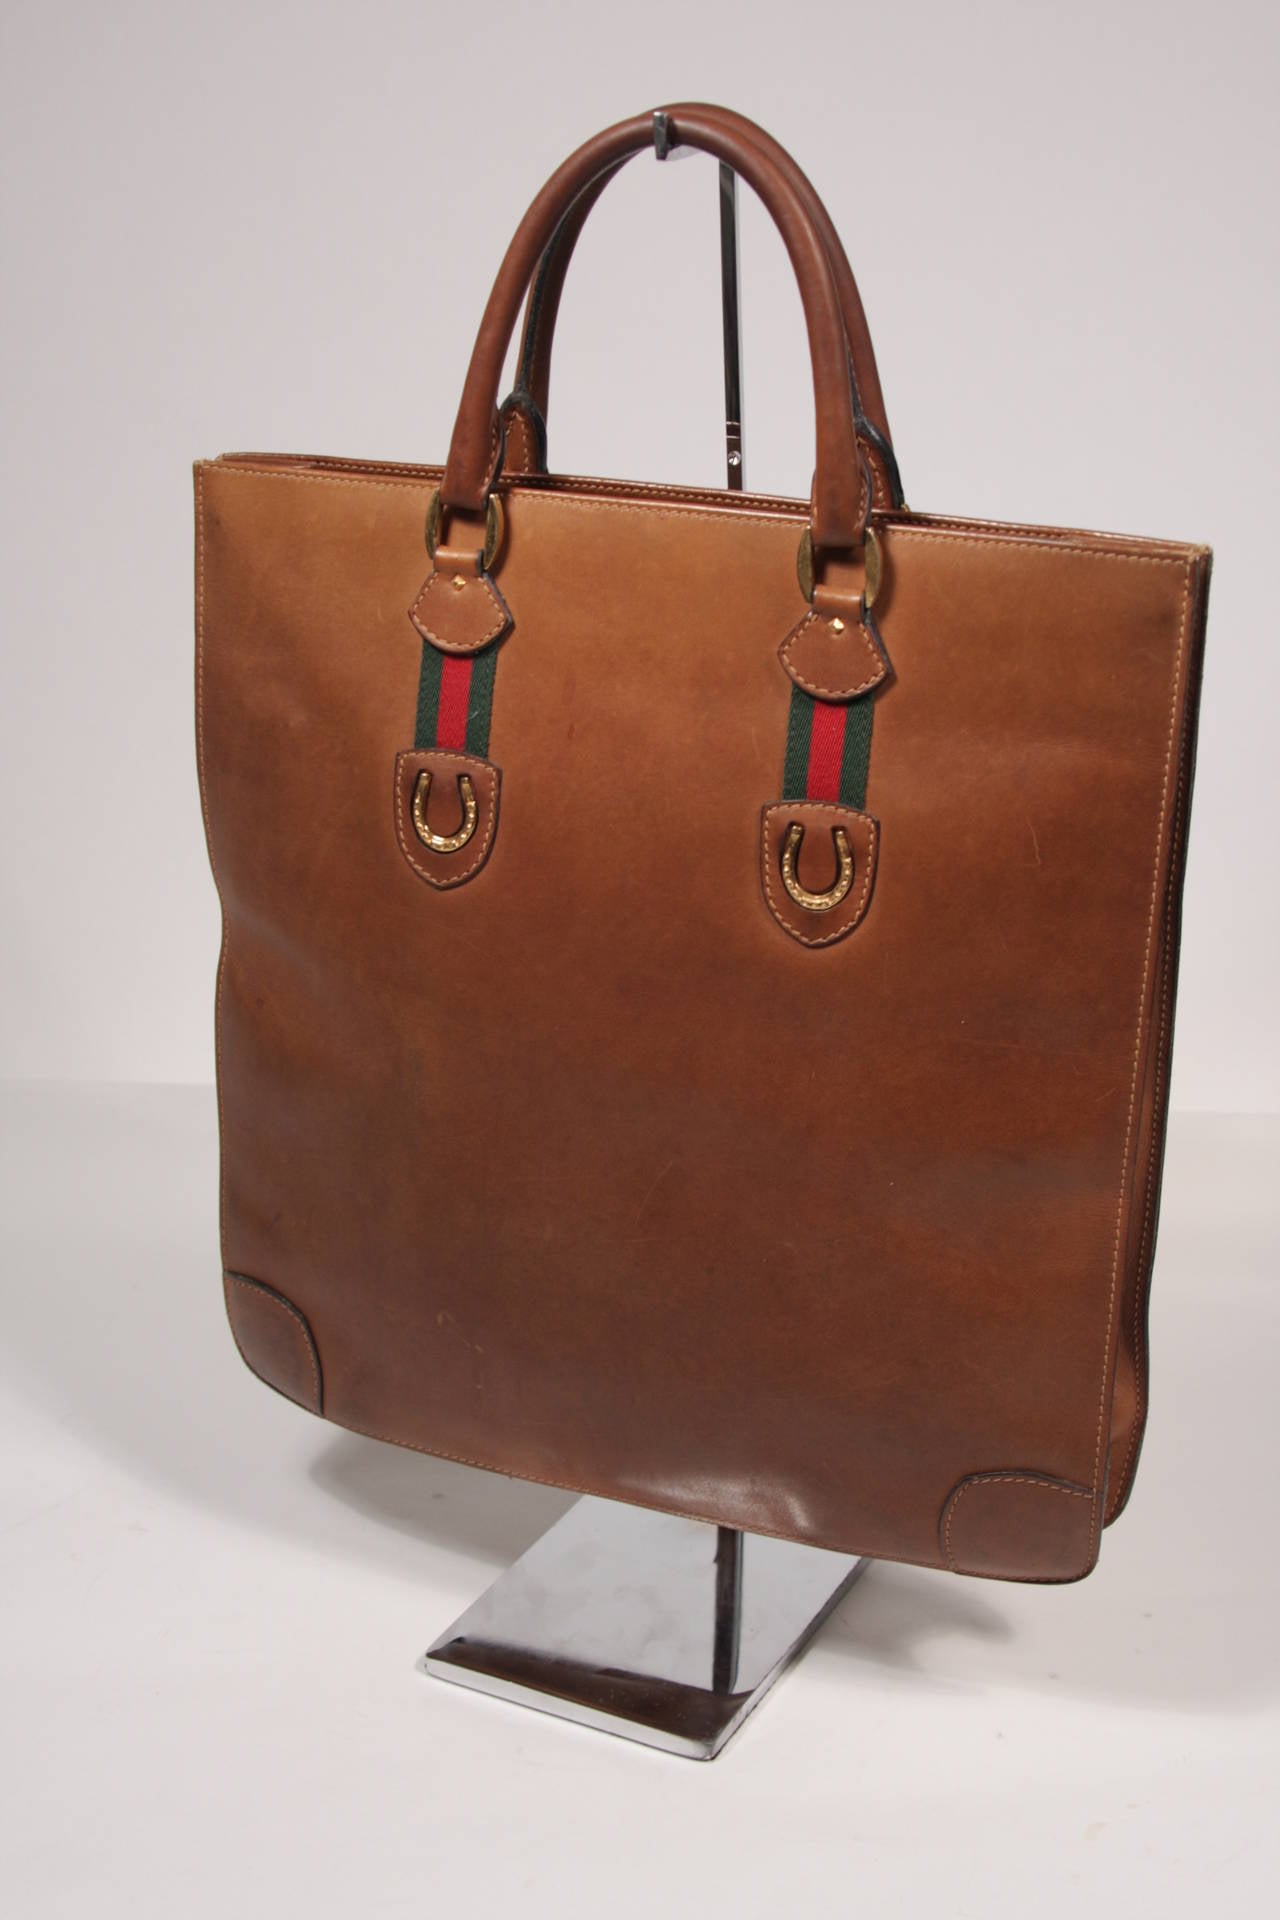 This is a Gucci vintage handbag. The tote style purse is composed of a wonderful cognac hued brown leather. It features a double strap design and is accented with gold toned horse shoes. The handbag is in good condition, yet shows signs of wear, the